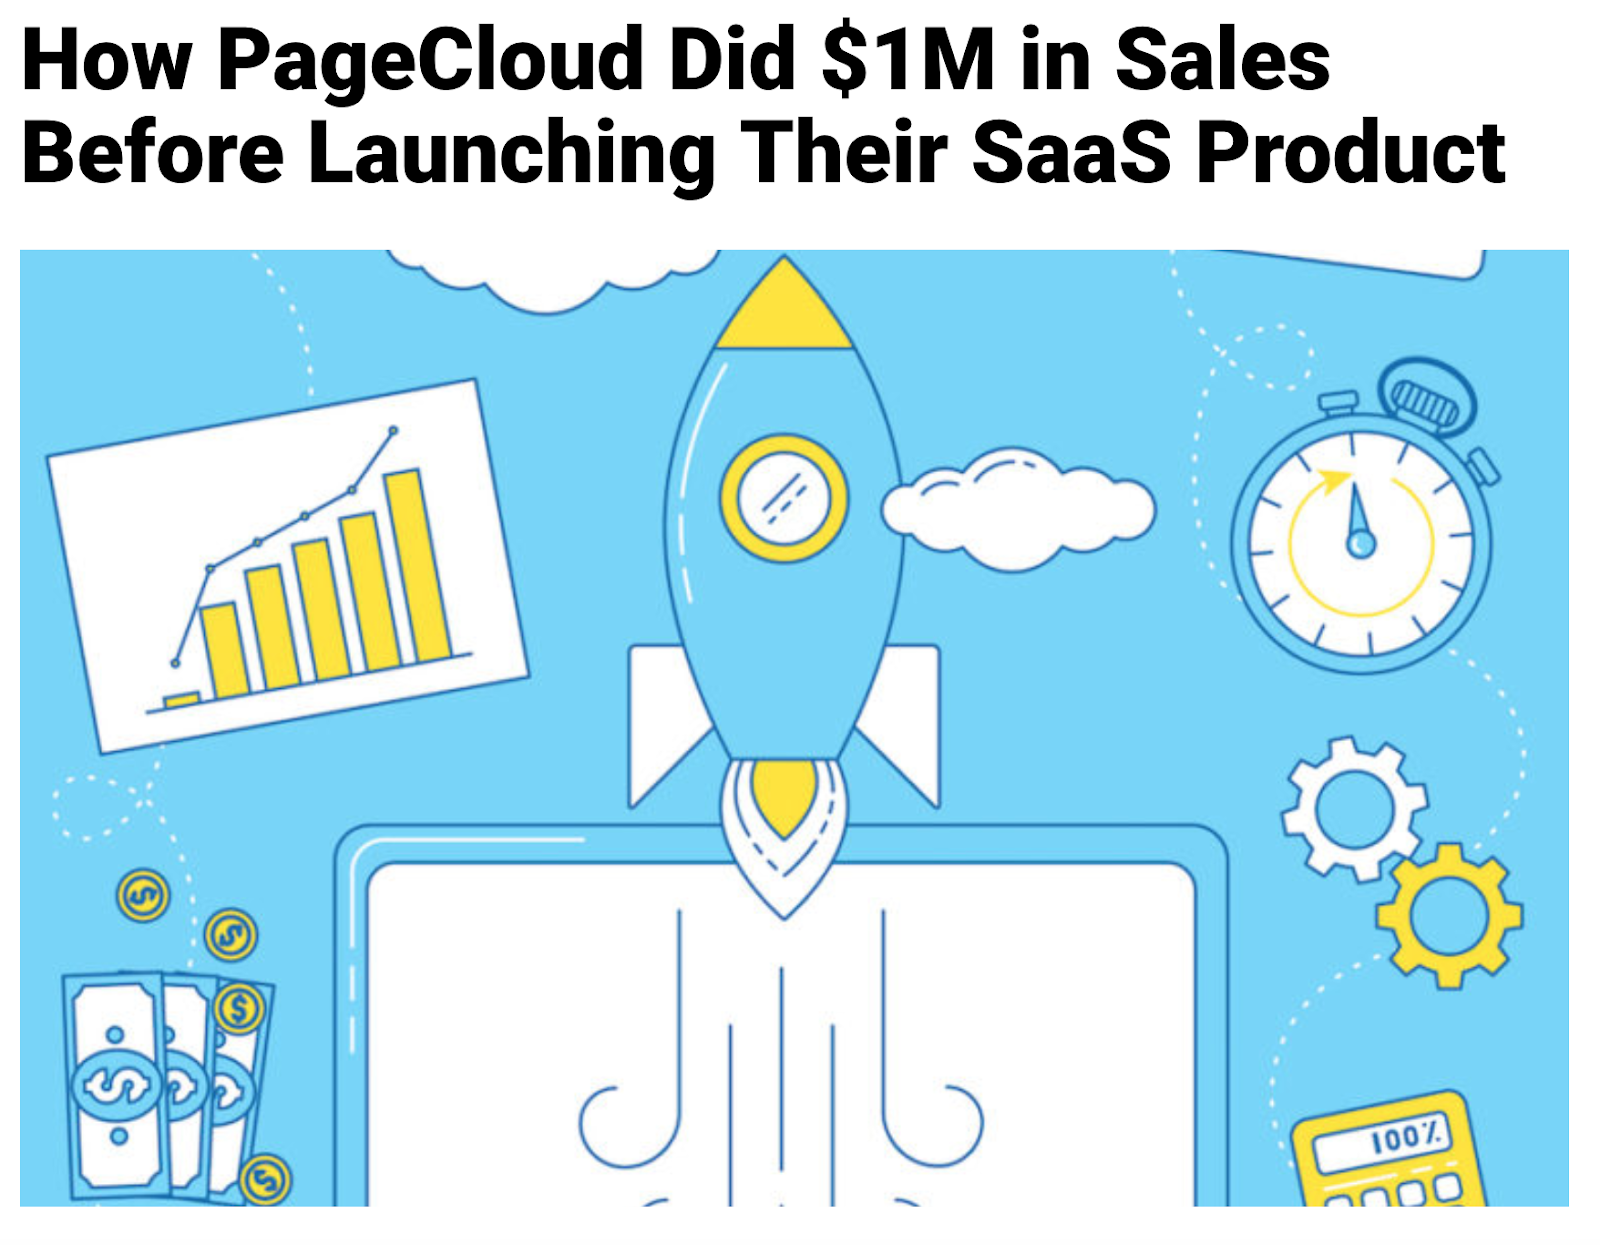 How PageCloud Did $1M in Sales Before Launching Their SaaS Product